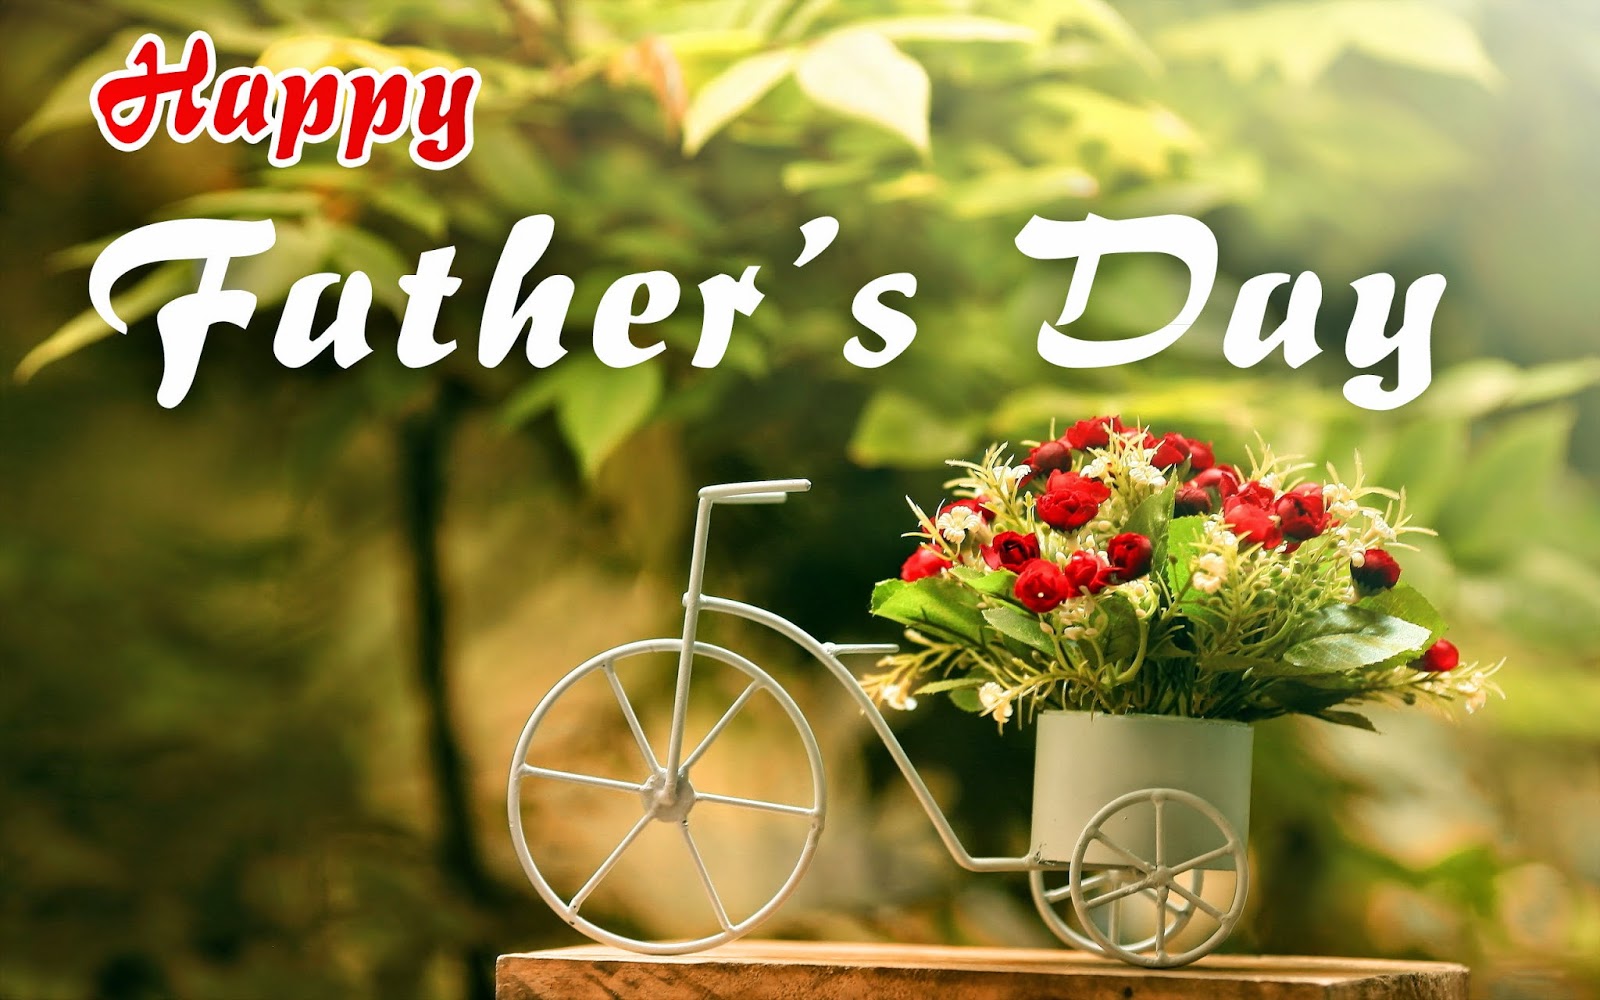 Top Image Wallpaper HD Pic And Greeting Cards Of Fathers